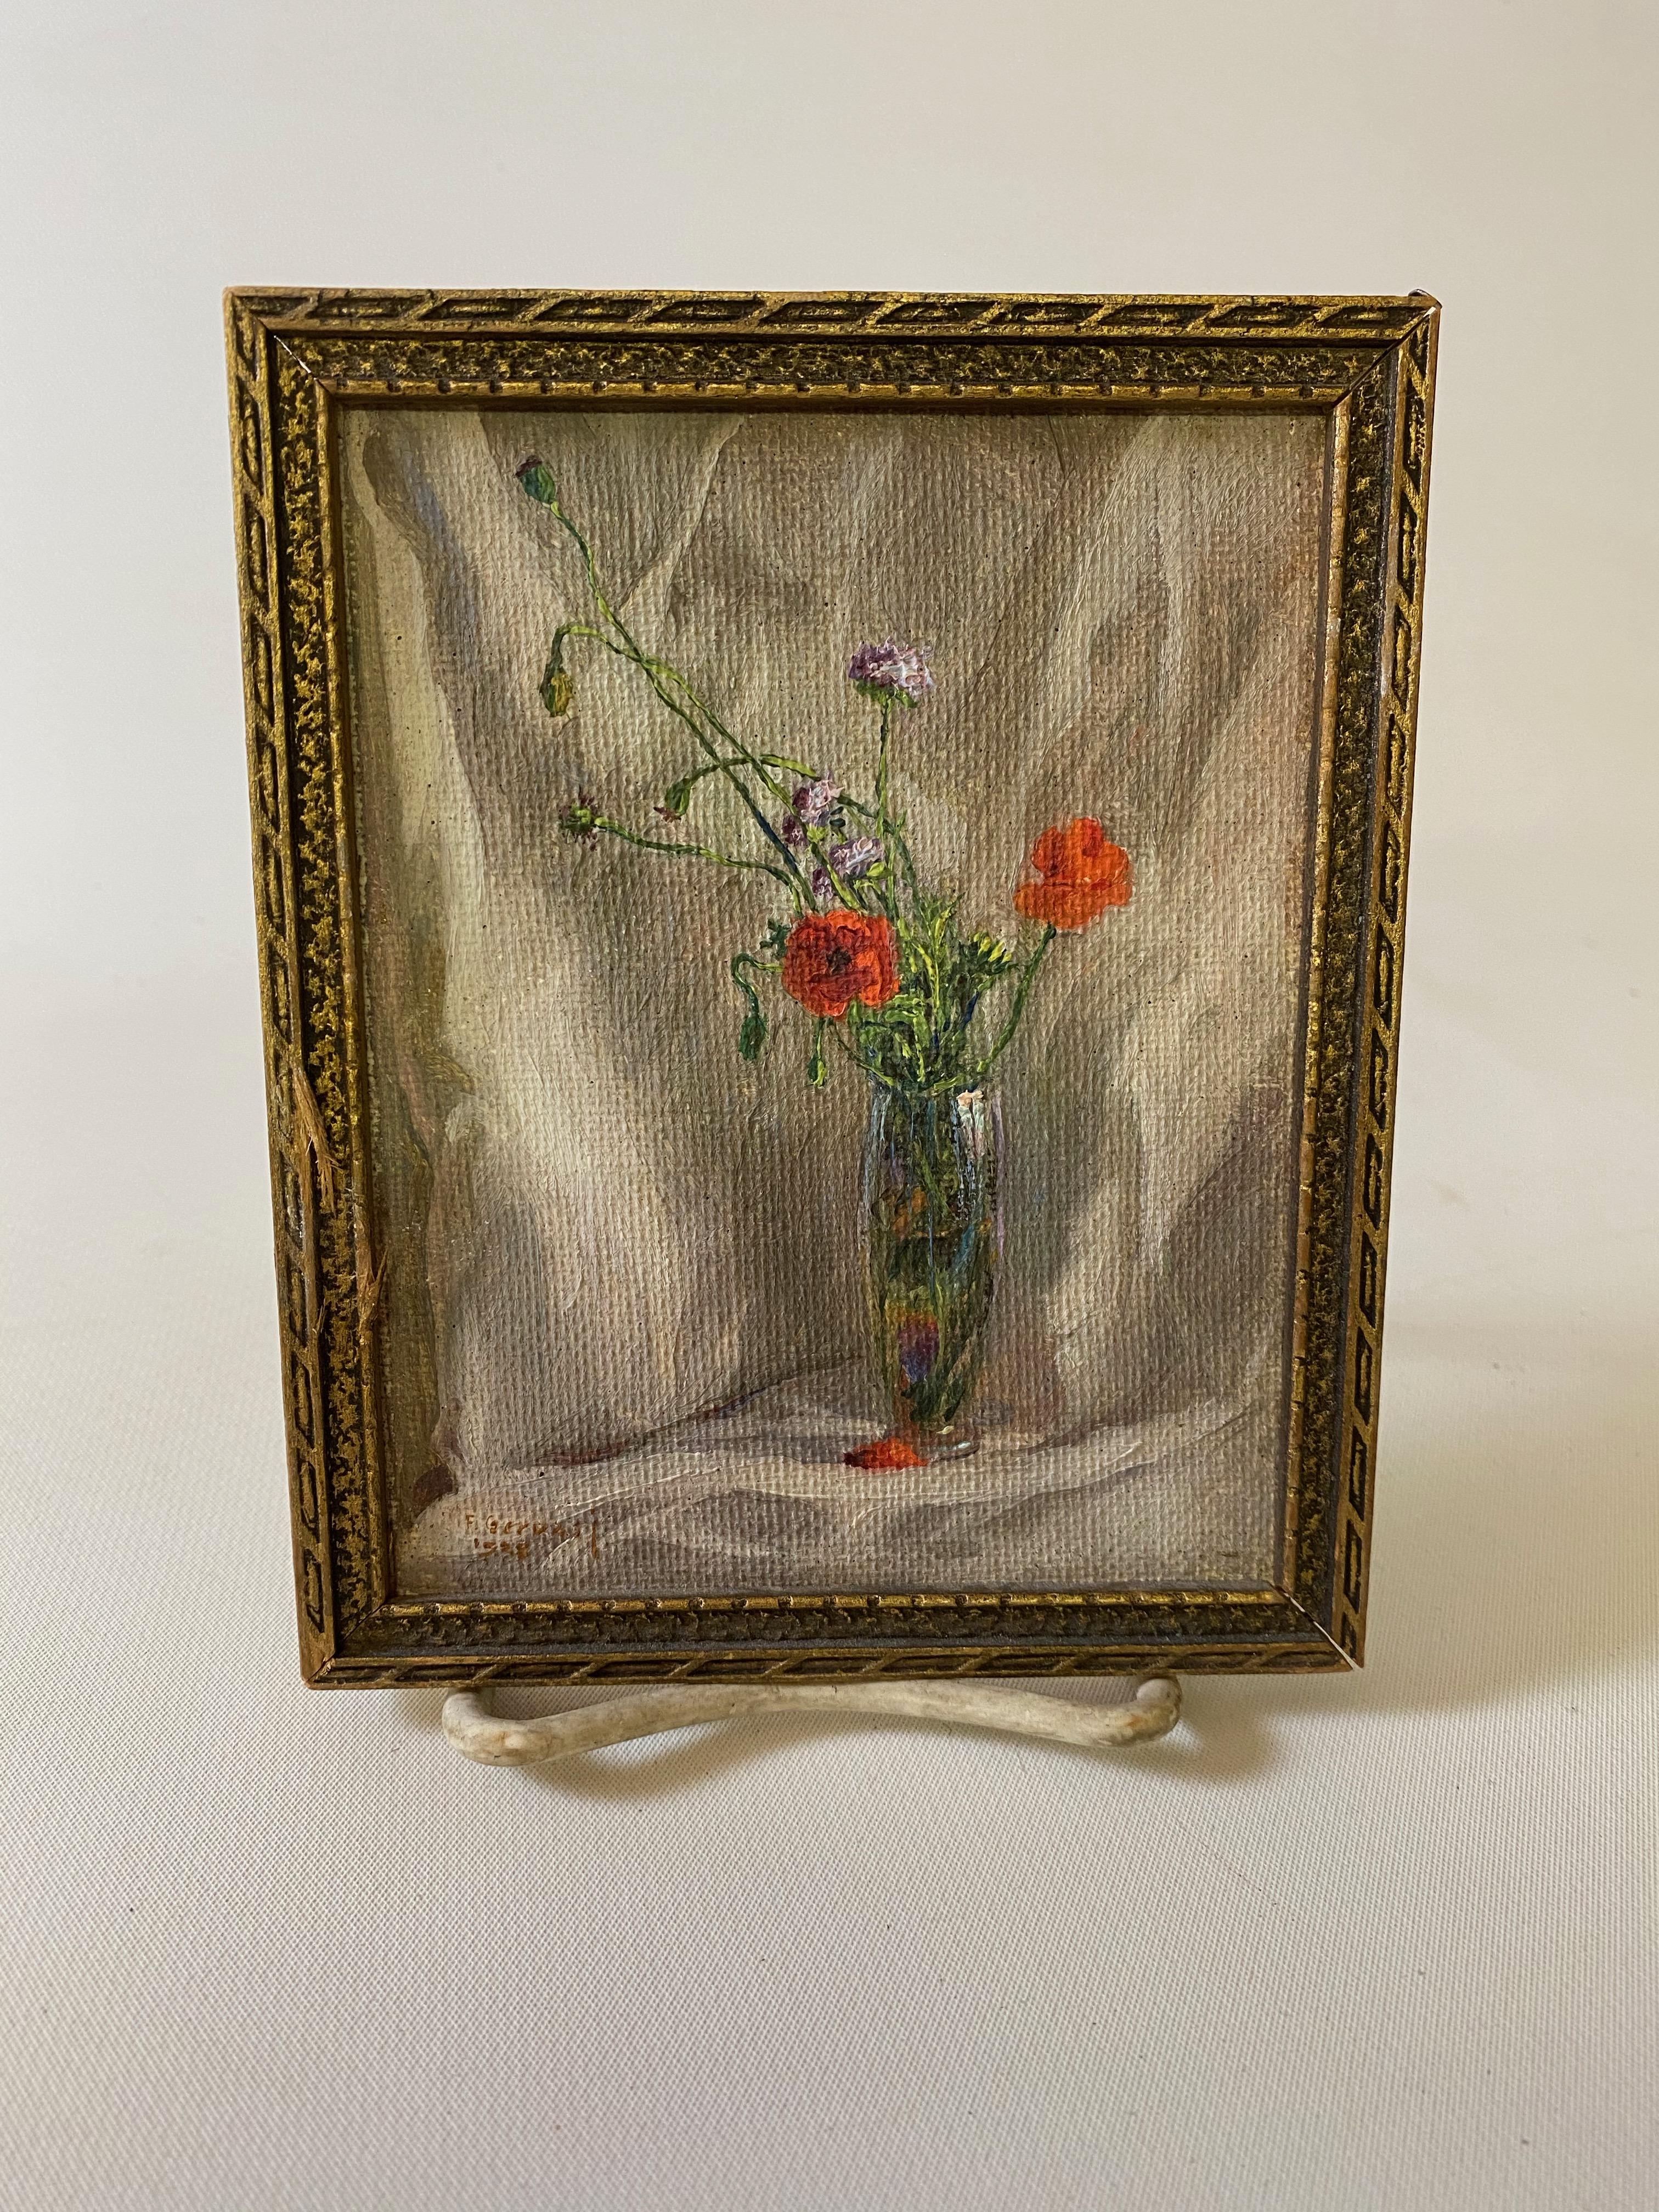 Signed lower left and dated, Frank Gervasi, 1928. Frank Gervasi (1895-1986), painted predominantly florals and landscapes and has a strong auction listing. This little gem would work well in a floral grouping or in a small area. The artist has